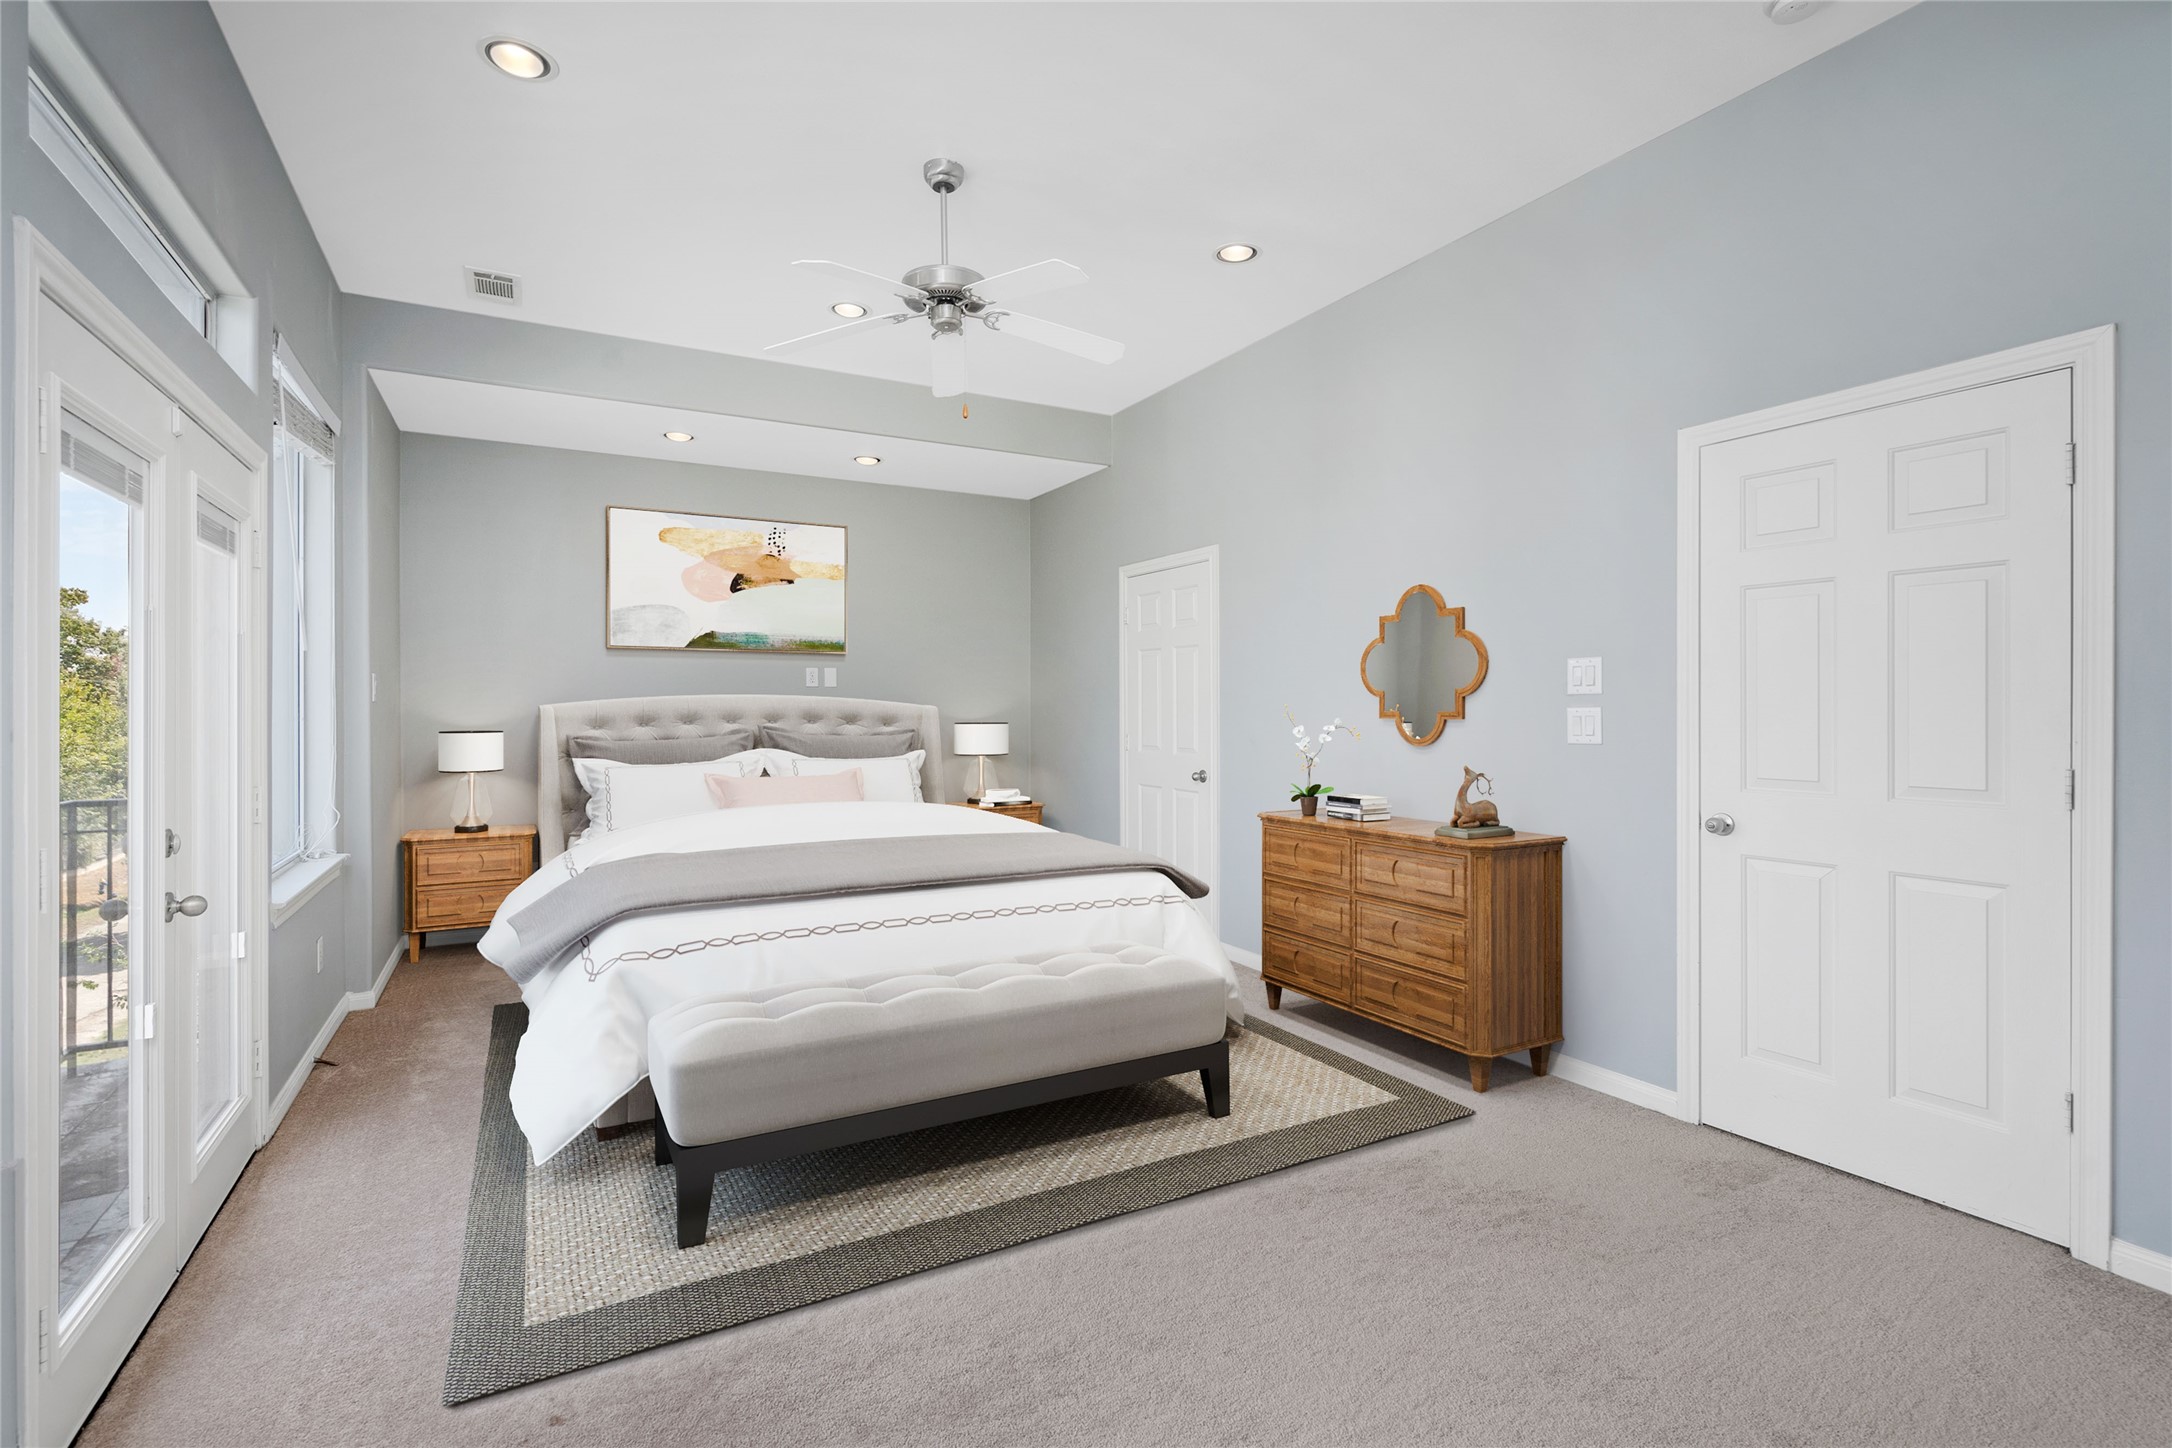 In the primary suite you will be welcomed by a beautiful green view and more natural lighting. *Virtual staging has been added*